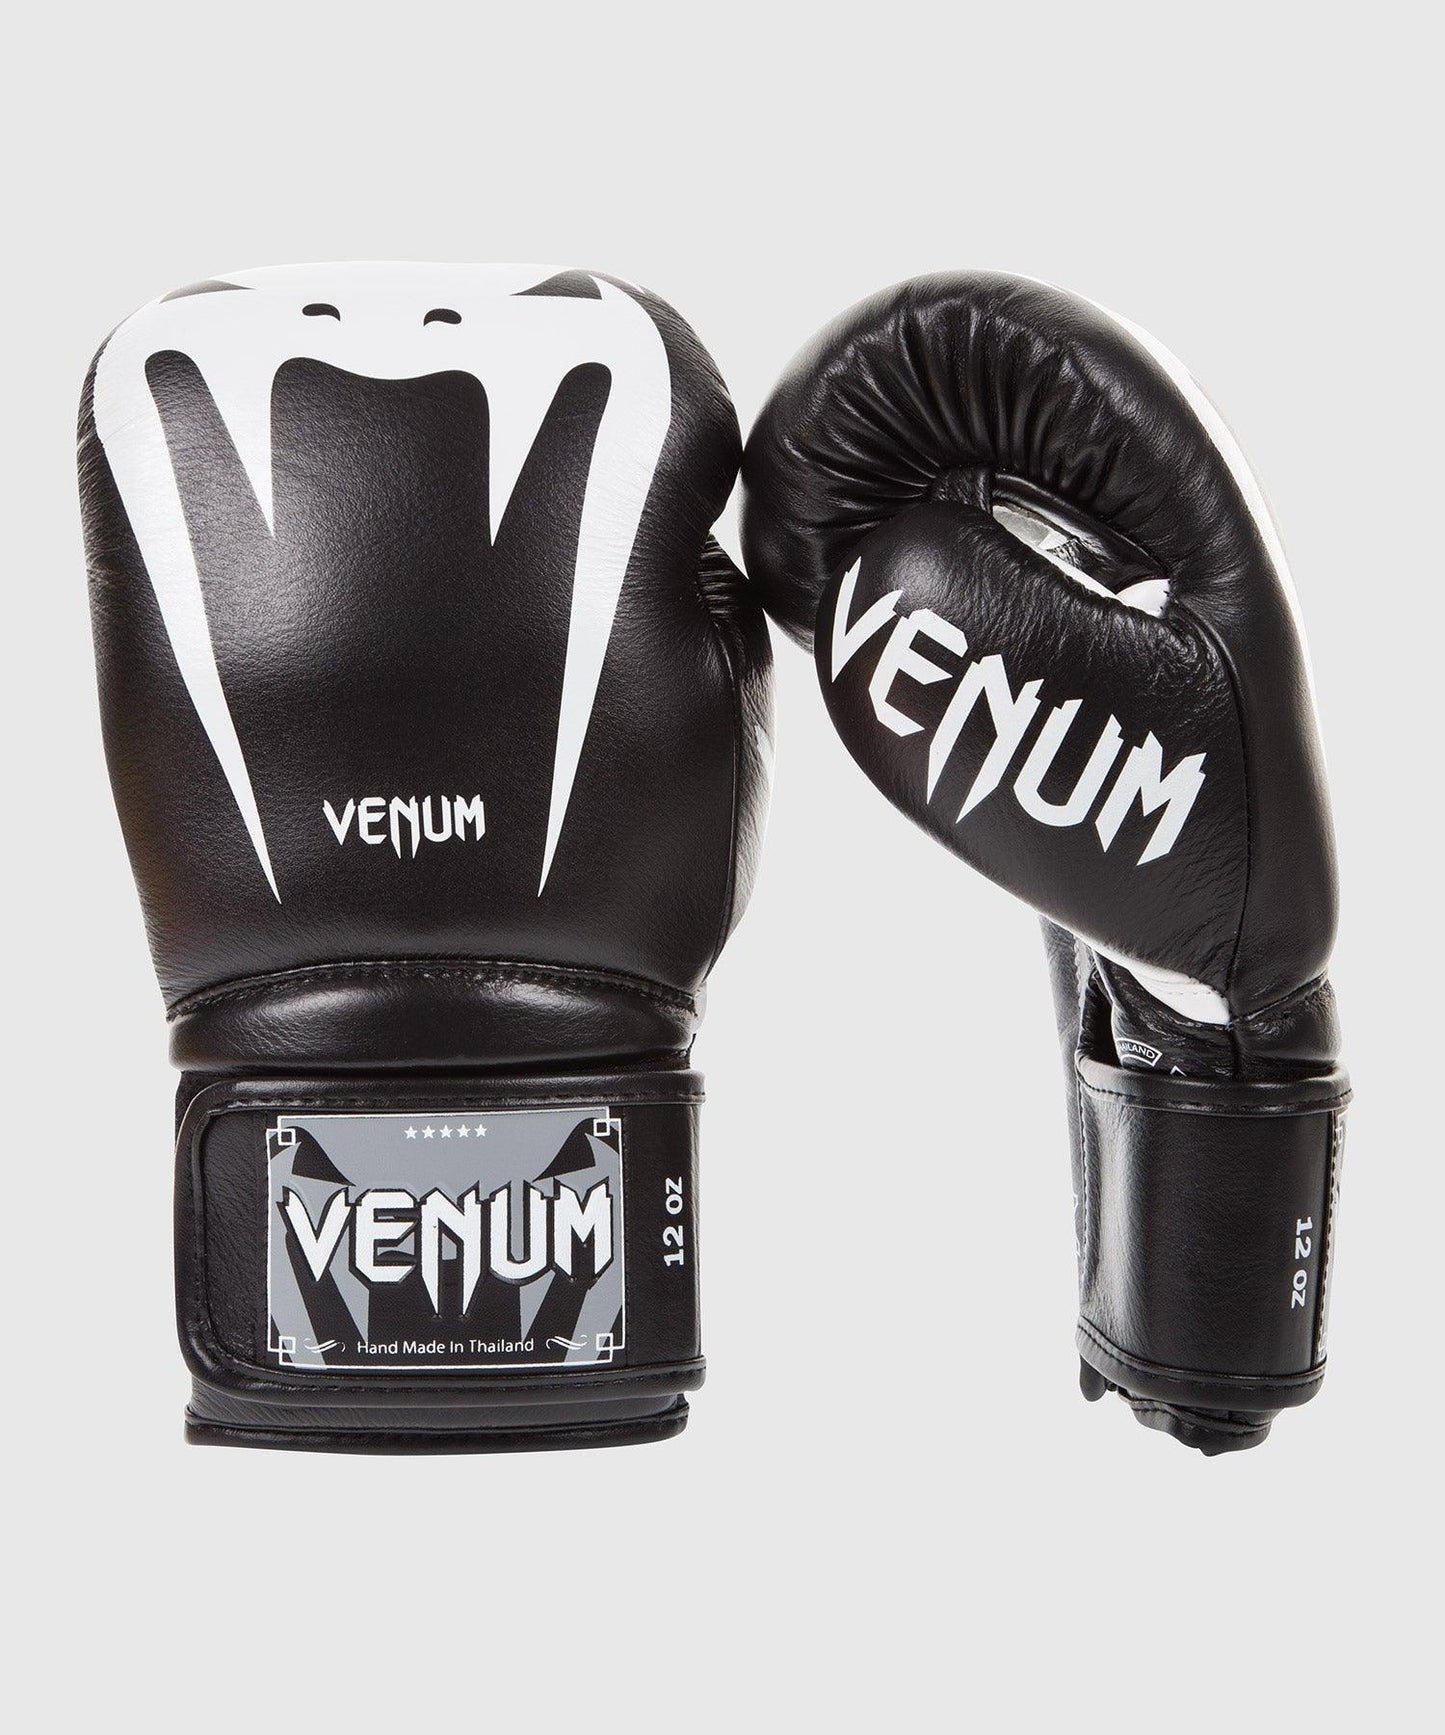 Venum Giant 3.0 Boxing Gloves - Nappa Leather - Black Picture 1